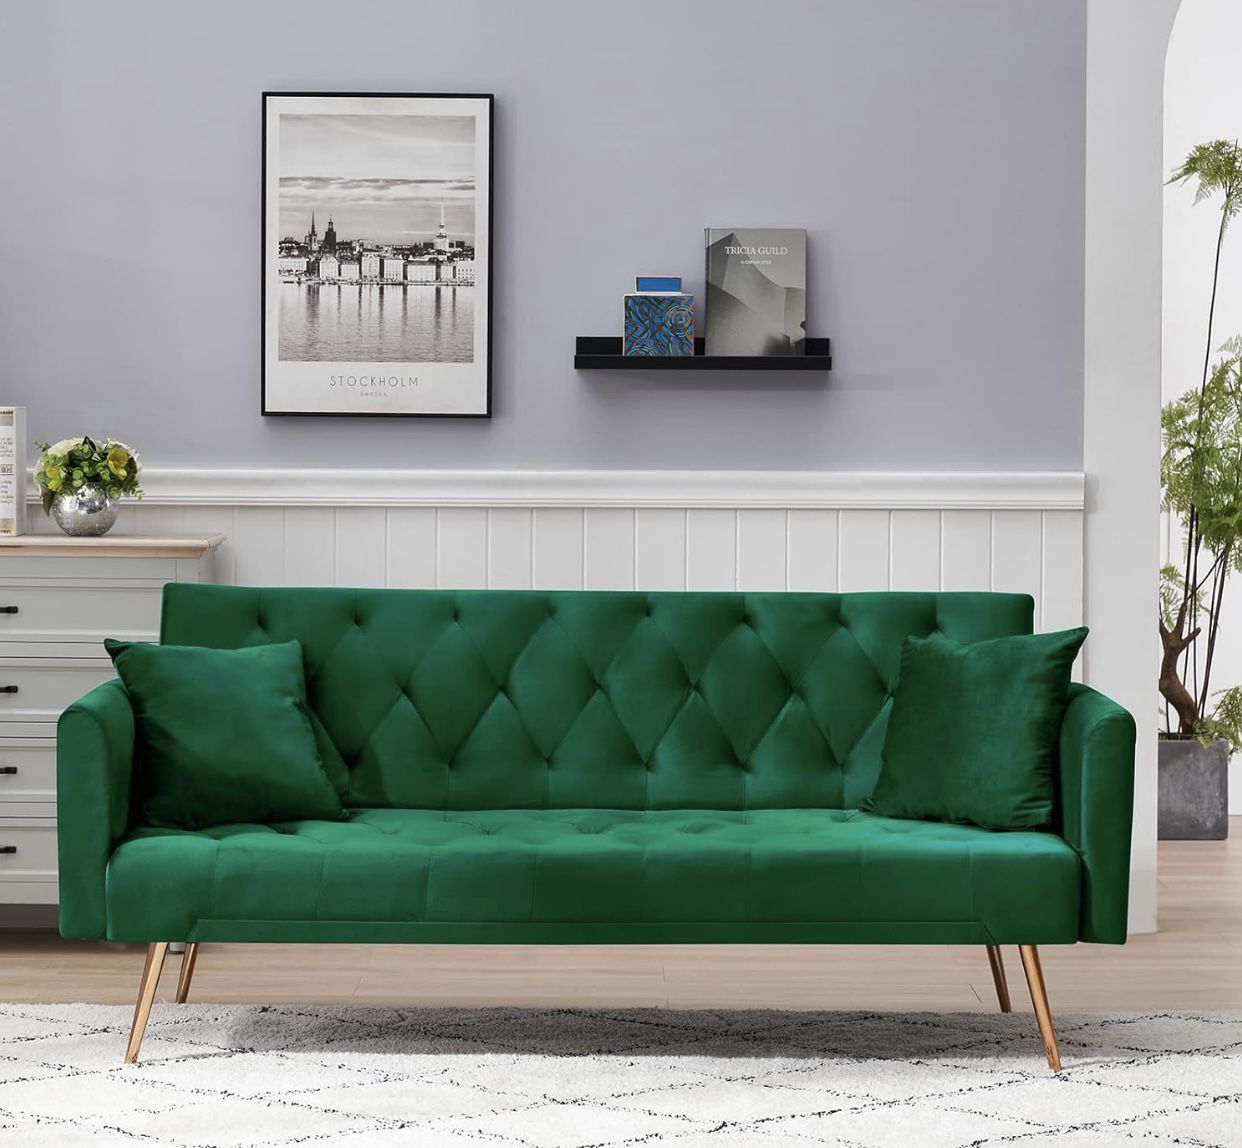 New in box Green Velvet Futon Sofa Bed with 2 Pillows, Convertible Sleeper Sofa Couch